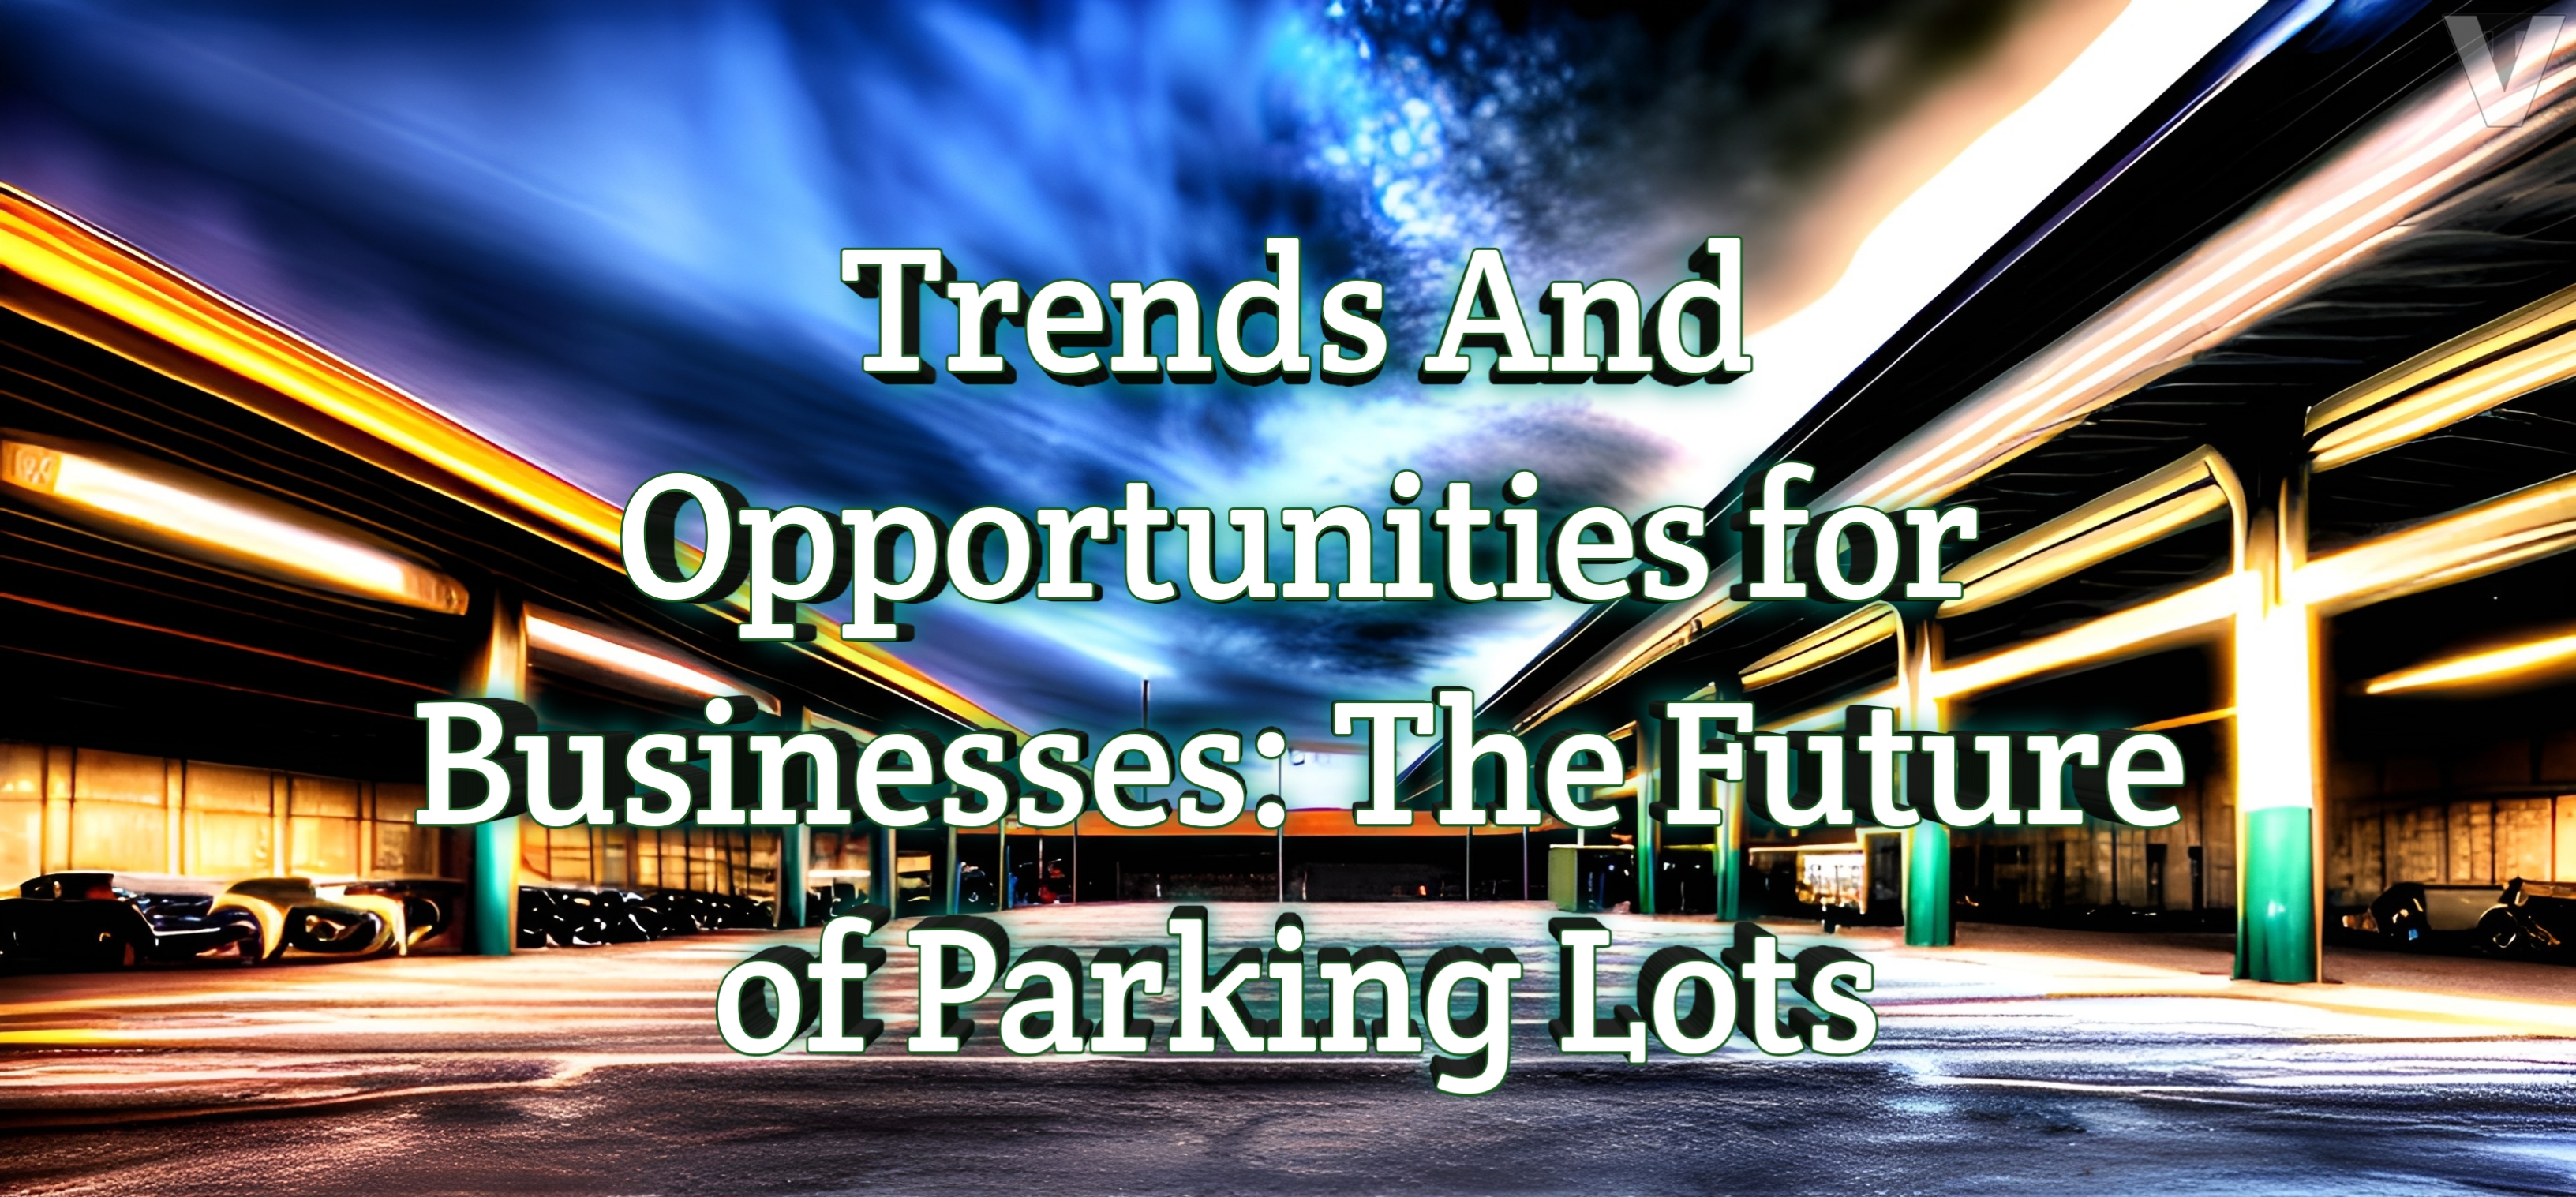 The Future of Parking Lots: Trends And Opportunities for Businesses | Content | VitalyTennant.com 3